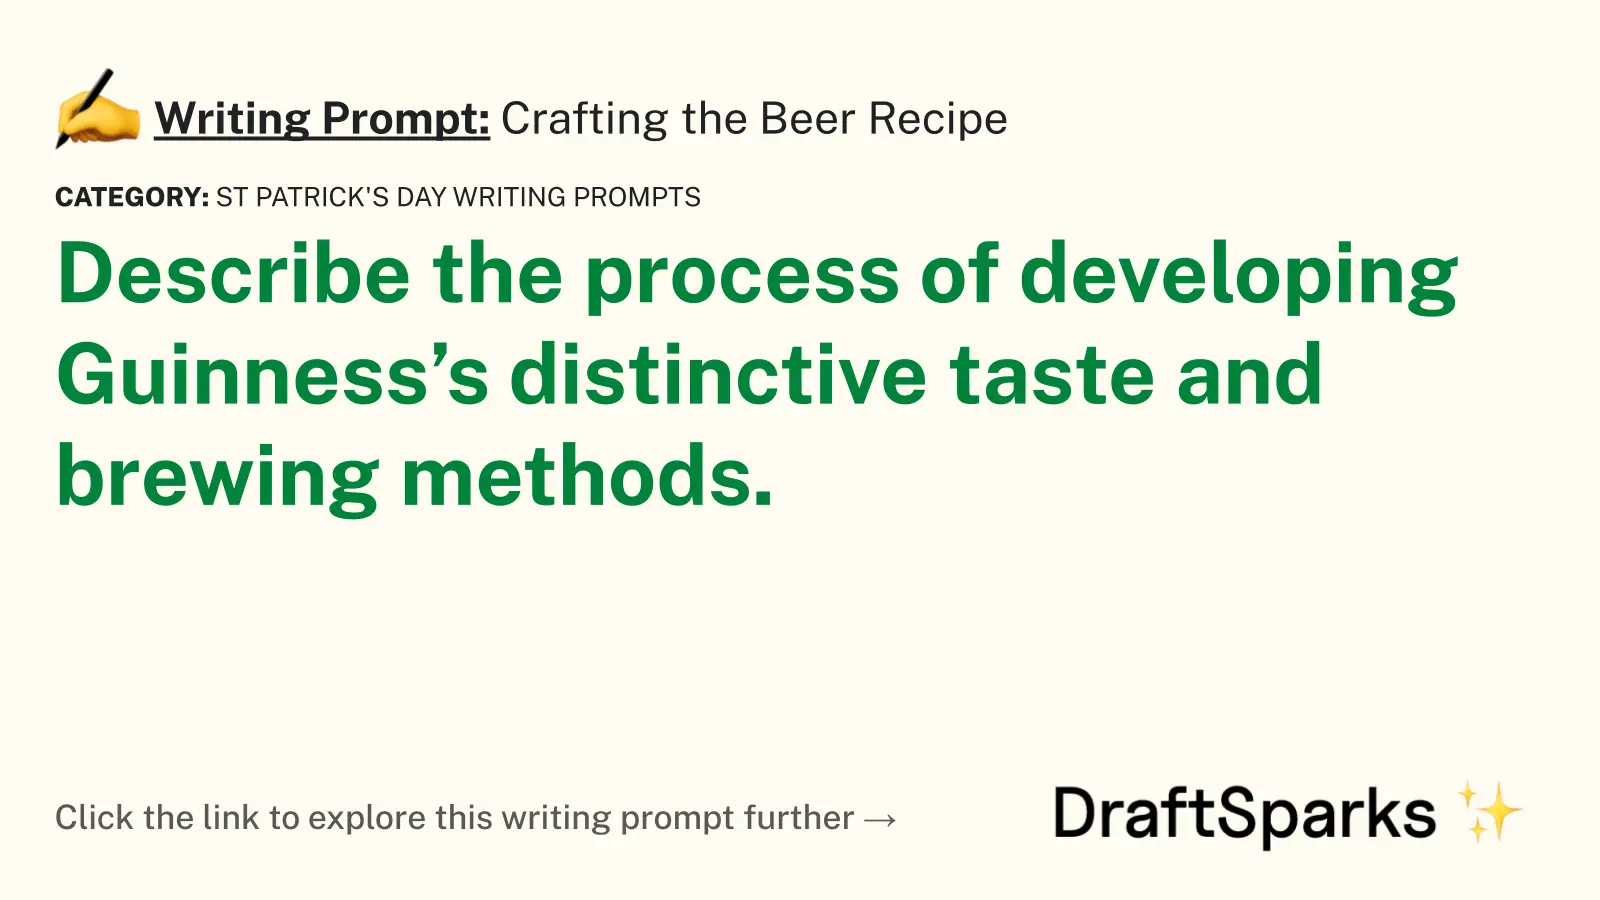 Crafting the Beer Recipe